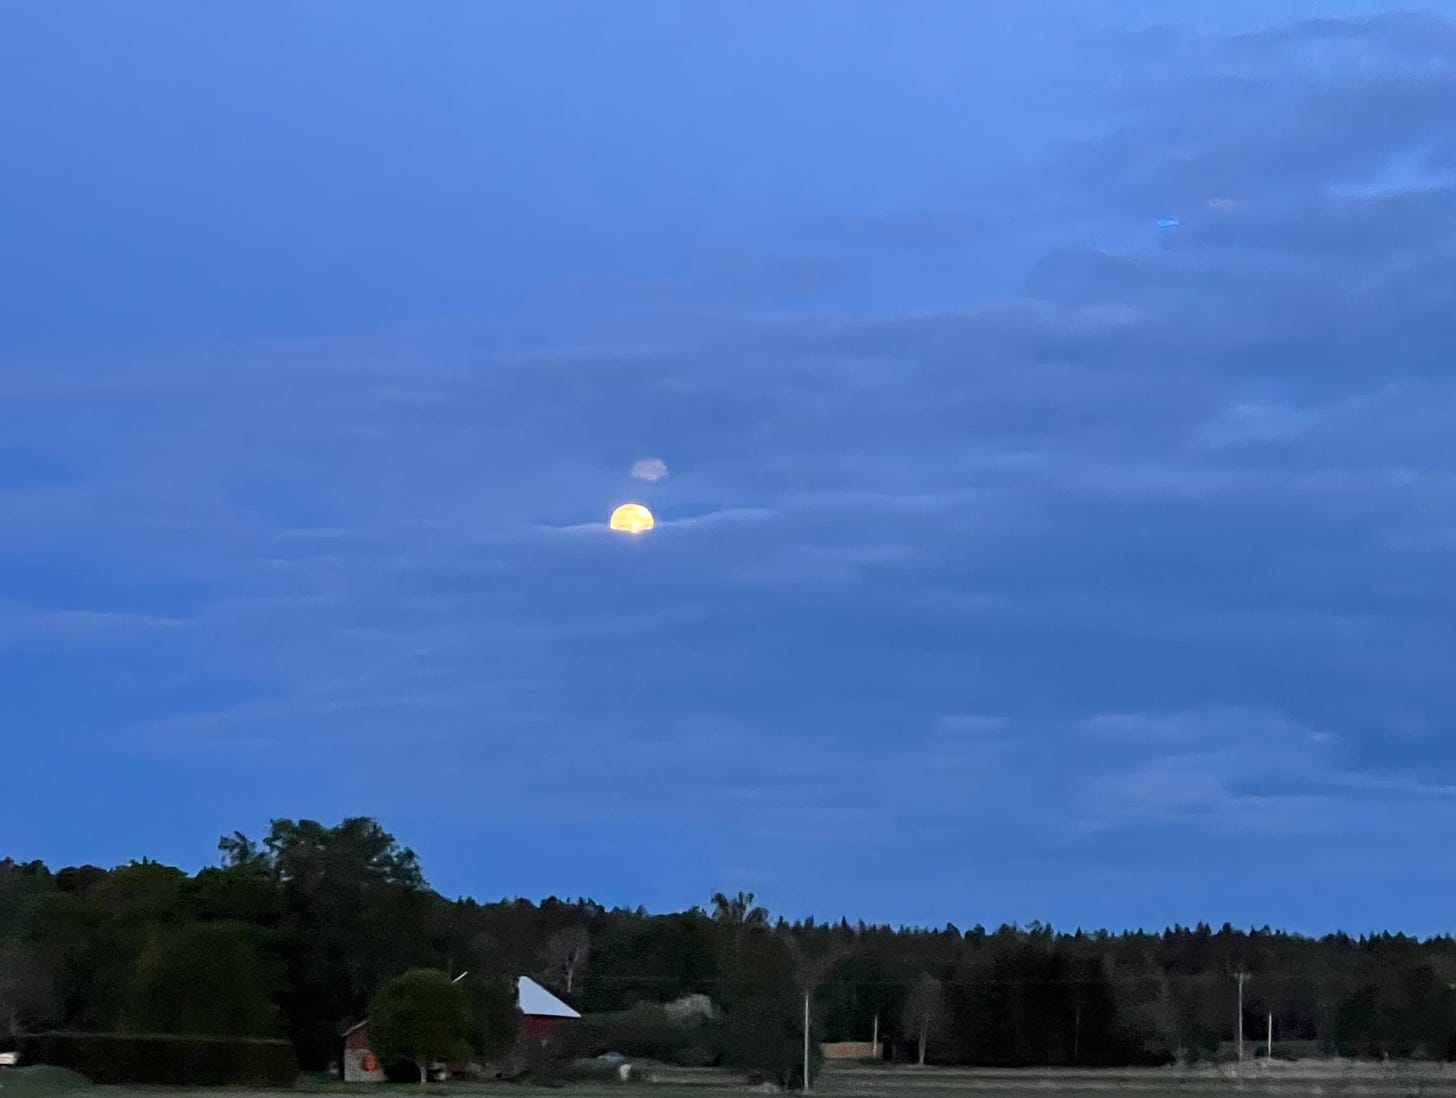 The full moon peeping through a cloudy sky hanging over a strip of forest and farmland